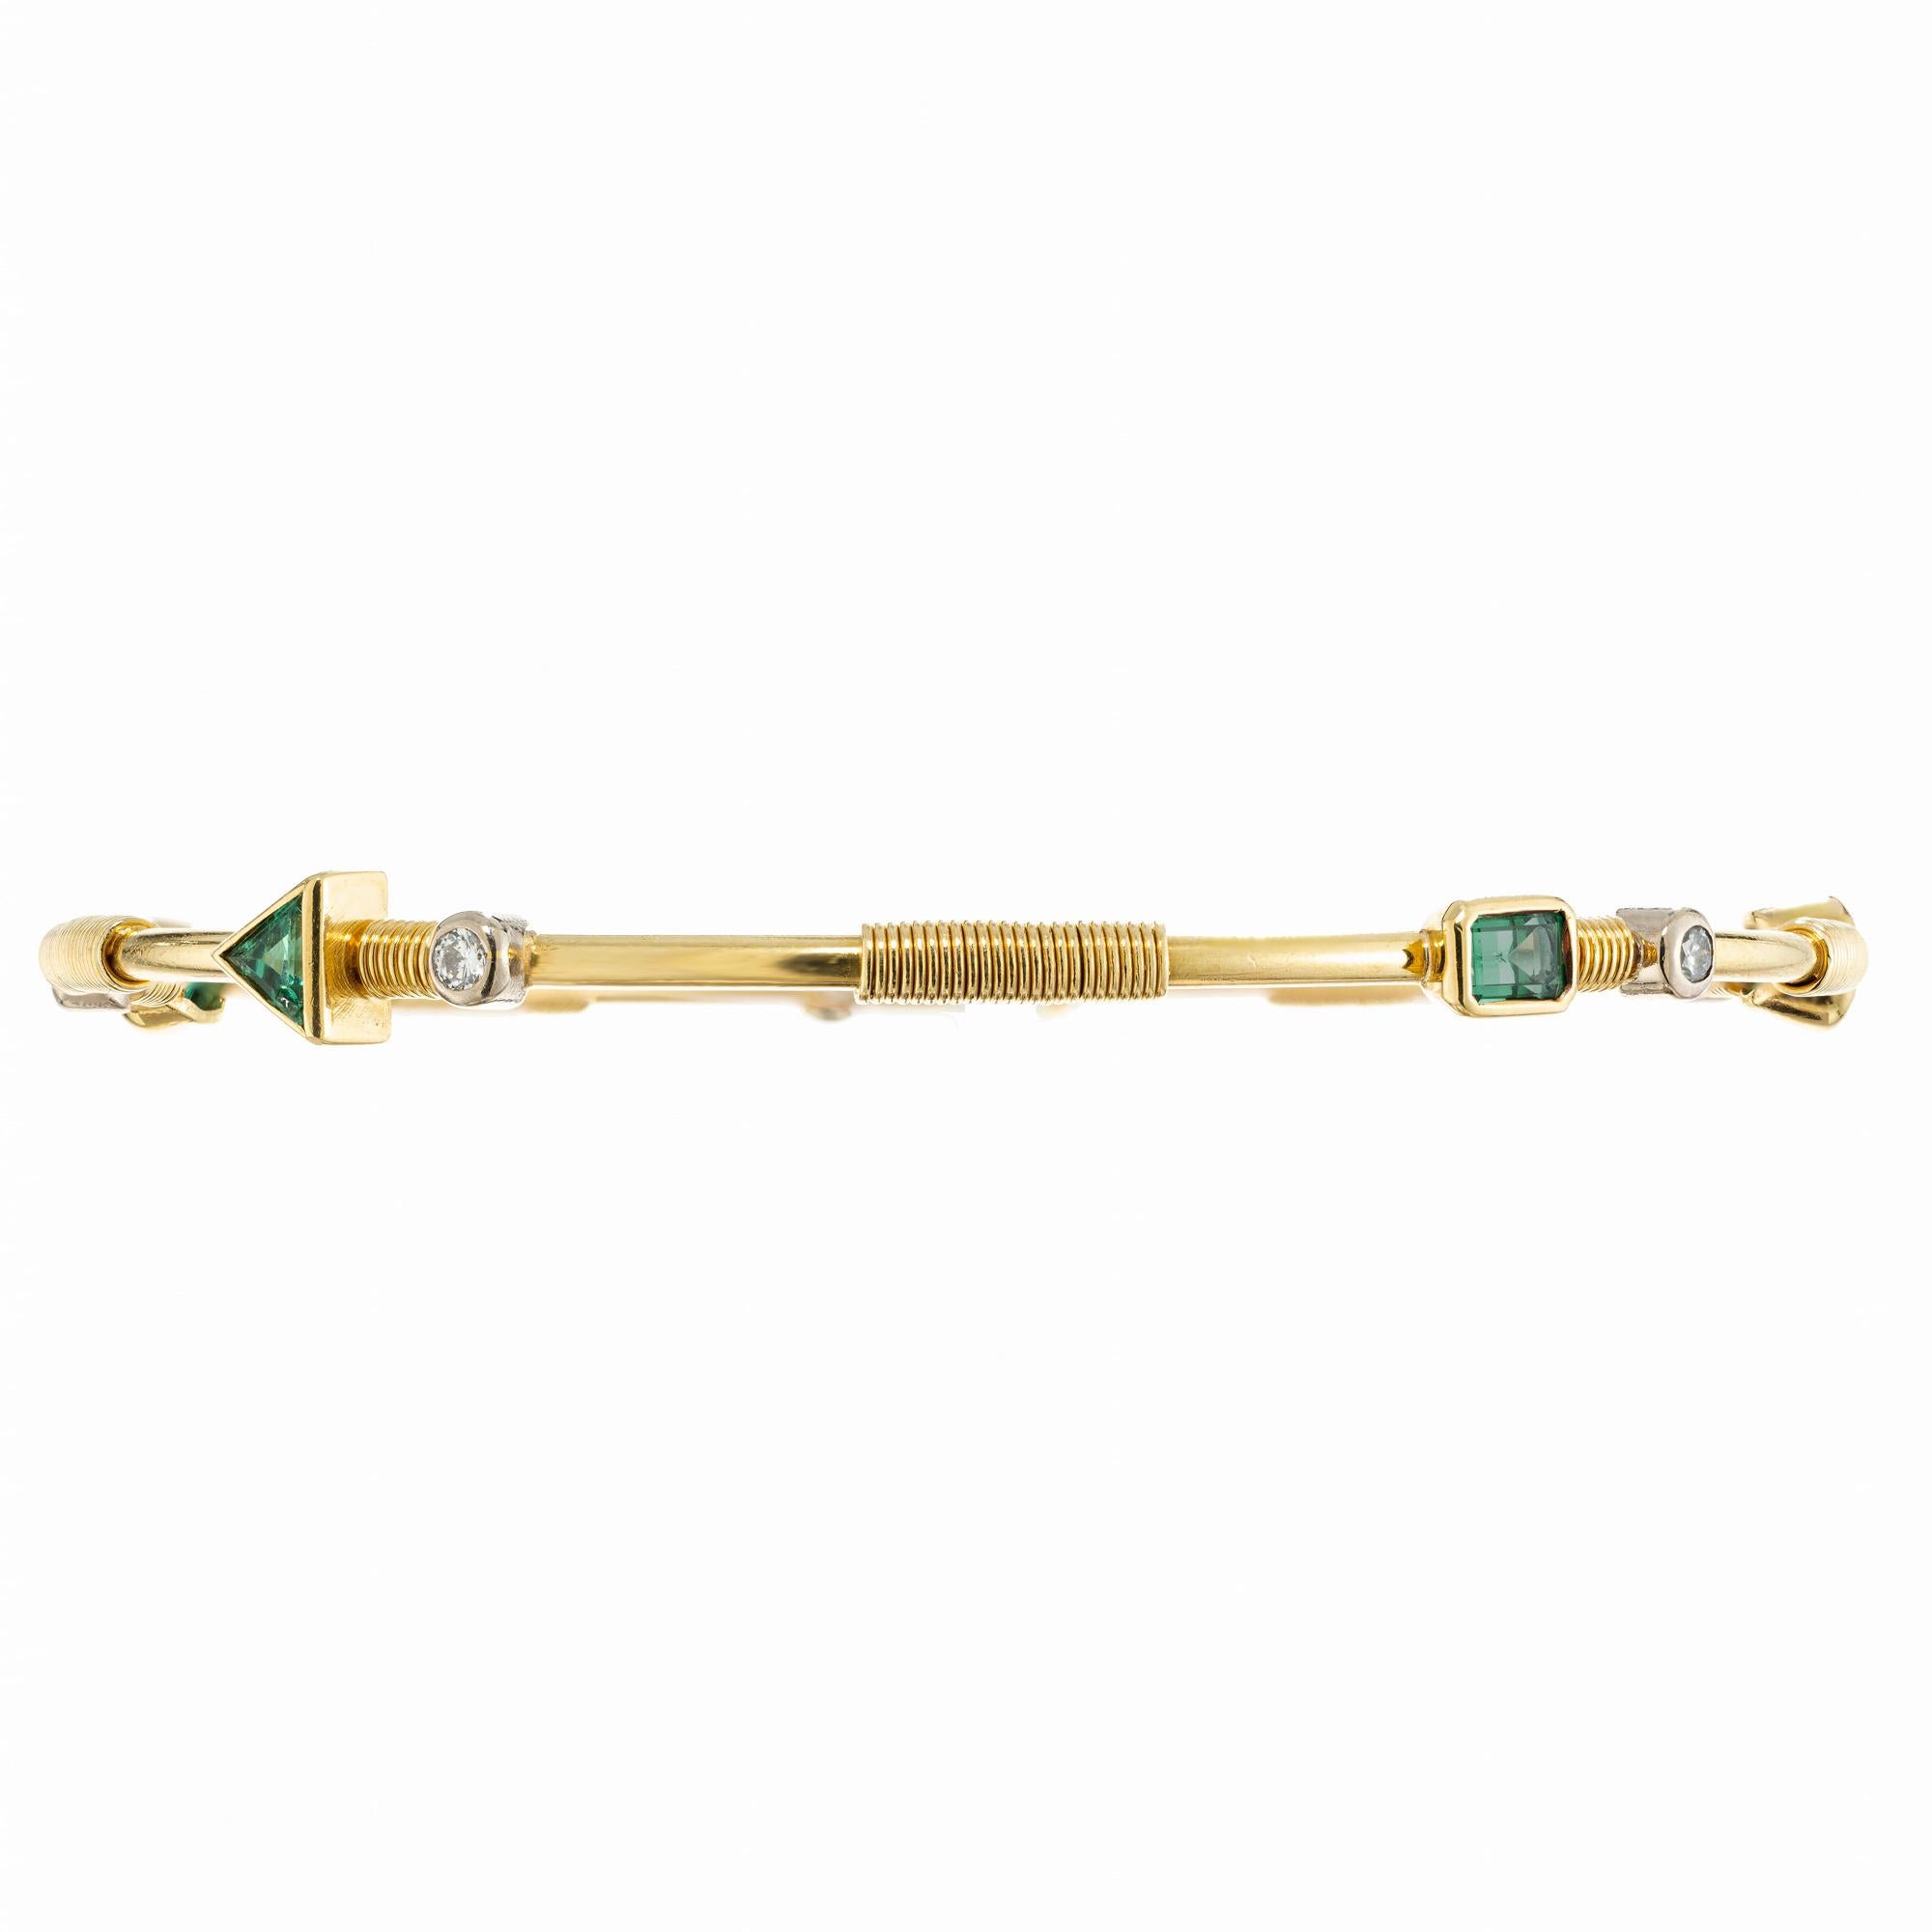 Artisanal handmade genuine multi shape Emerald gold bangle bracelet. This unique hand crafted 18k yellow gold slip on bangle is adorned with a mix of round, triangle, oval, rectangle and emerald cut diamonds and emeralds. Each section in-between is